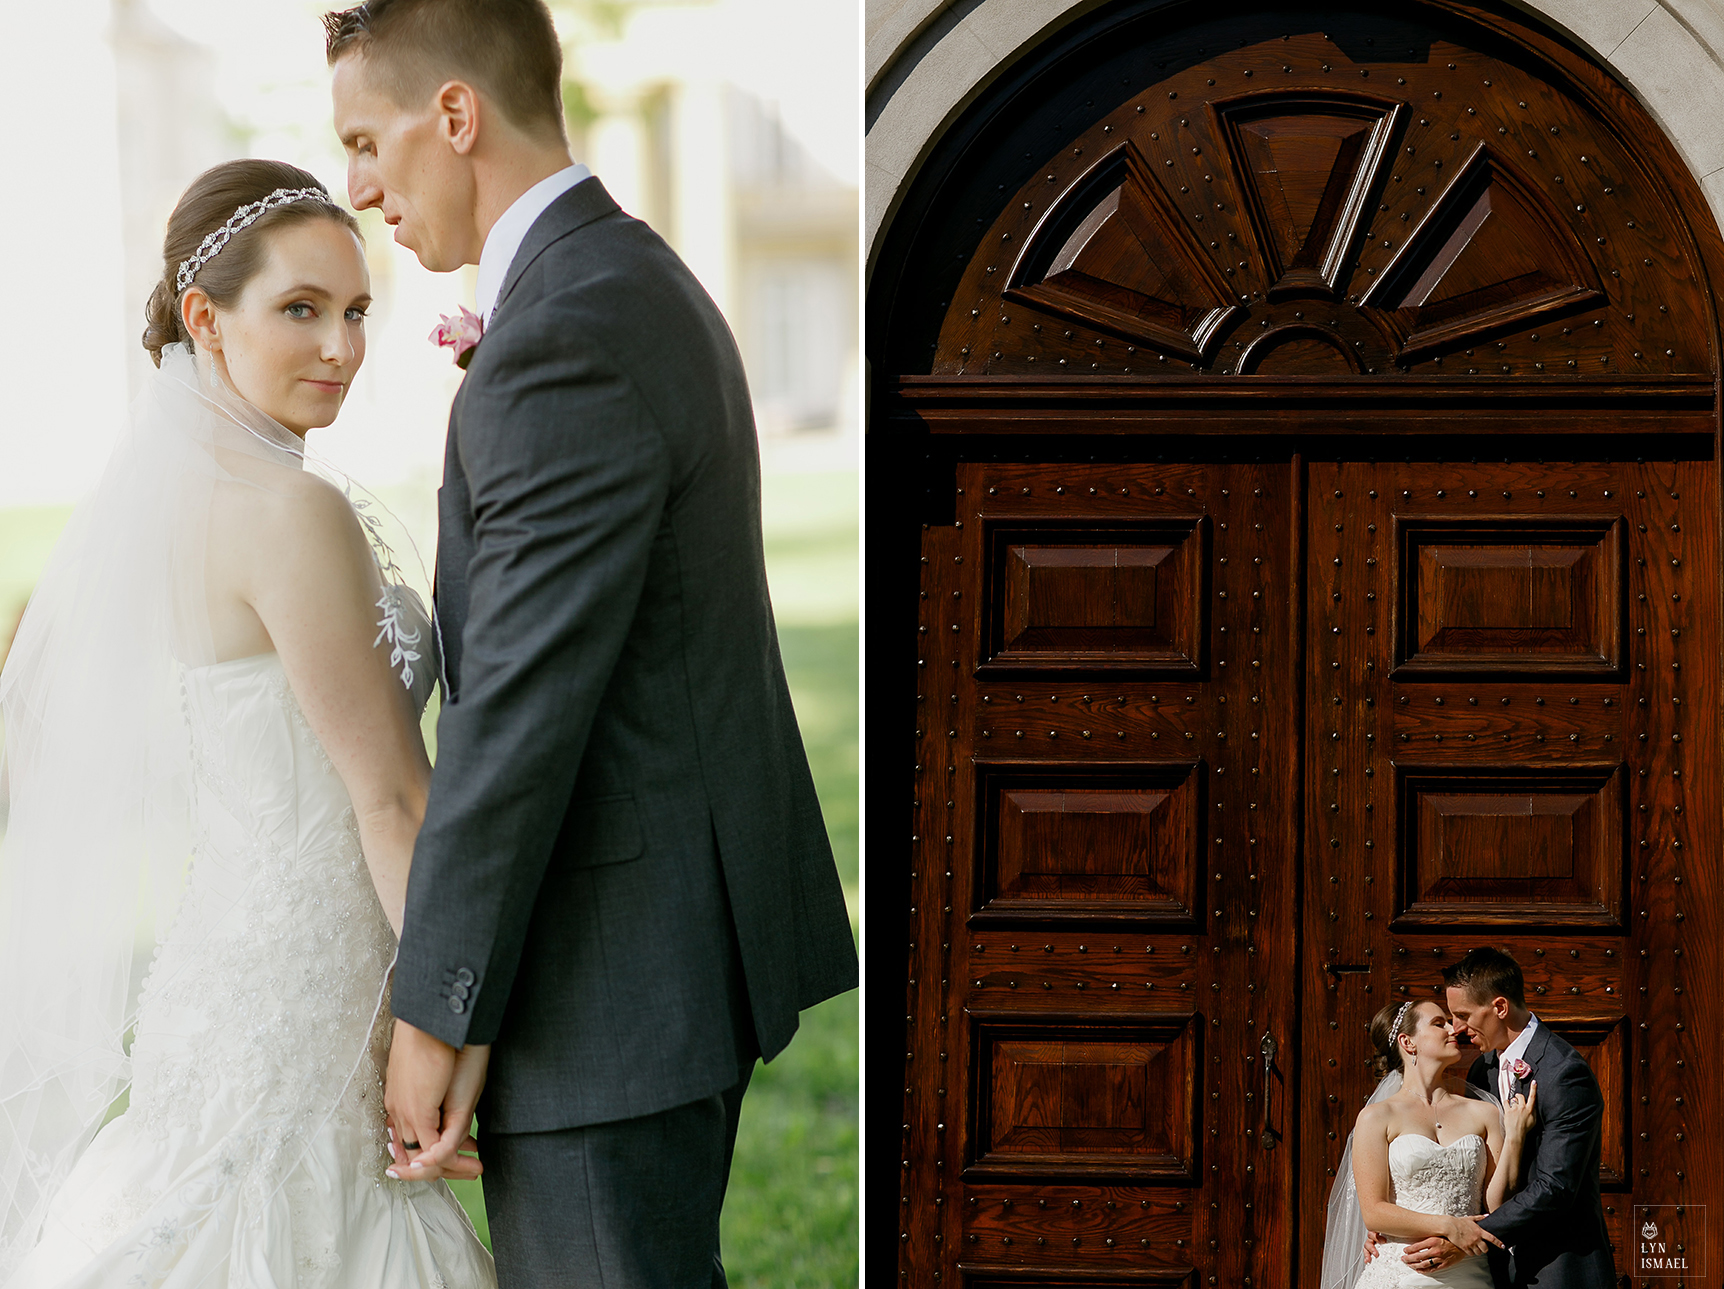 Portraits of the bride and groom in front of Dundurn Castle.